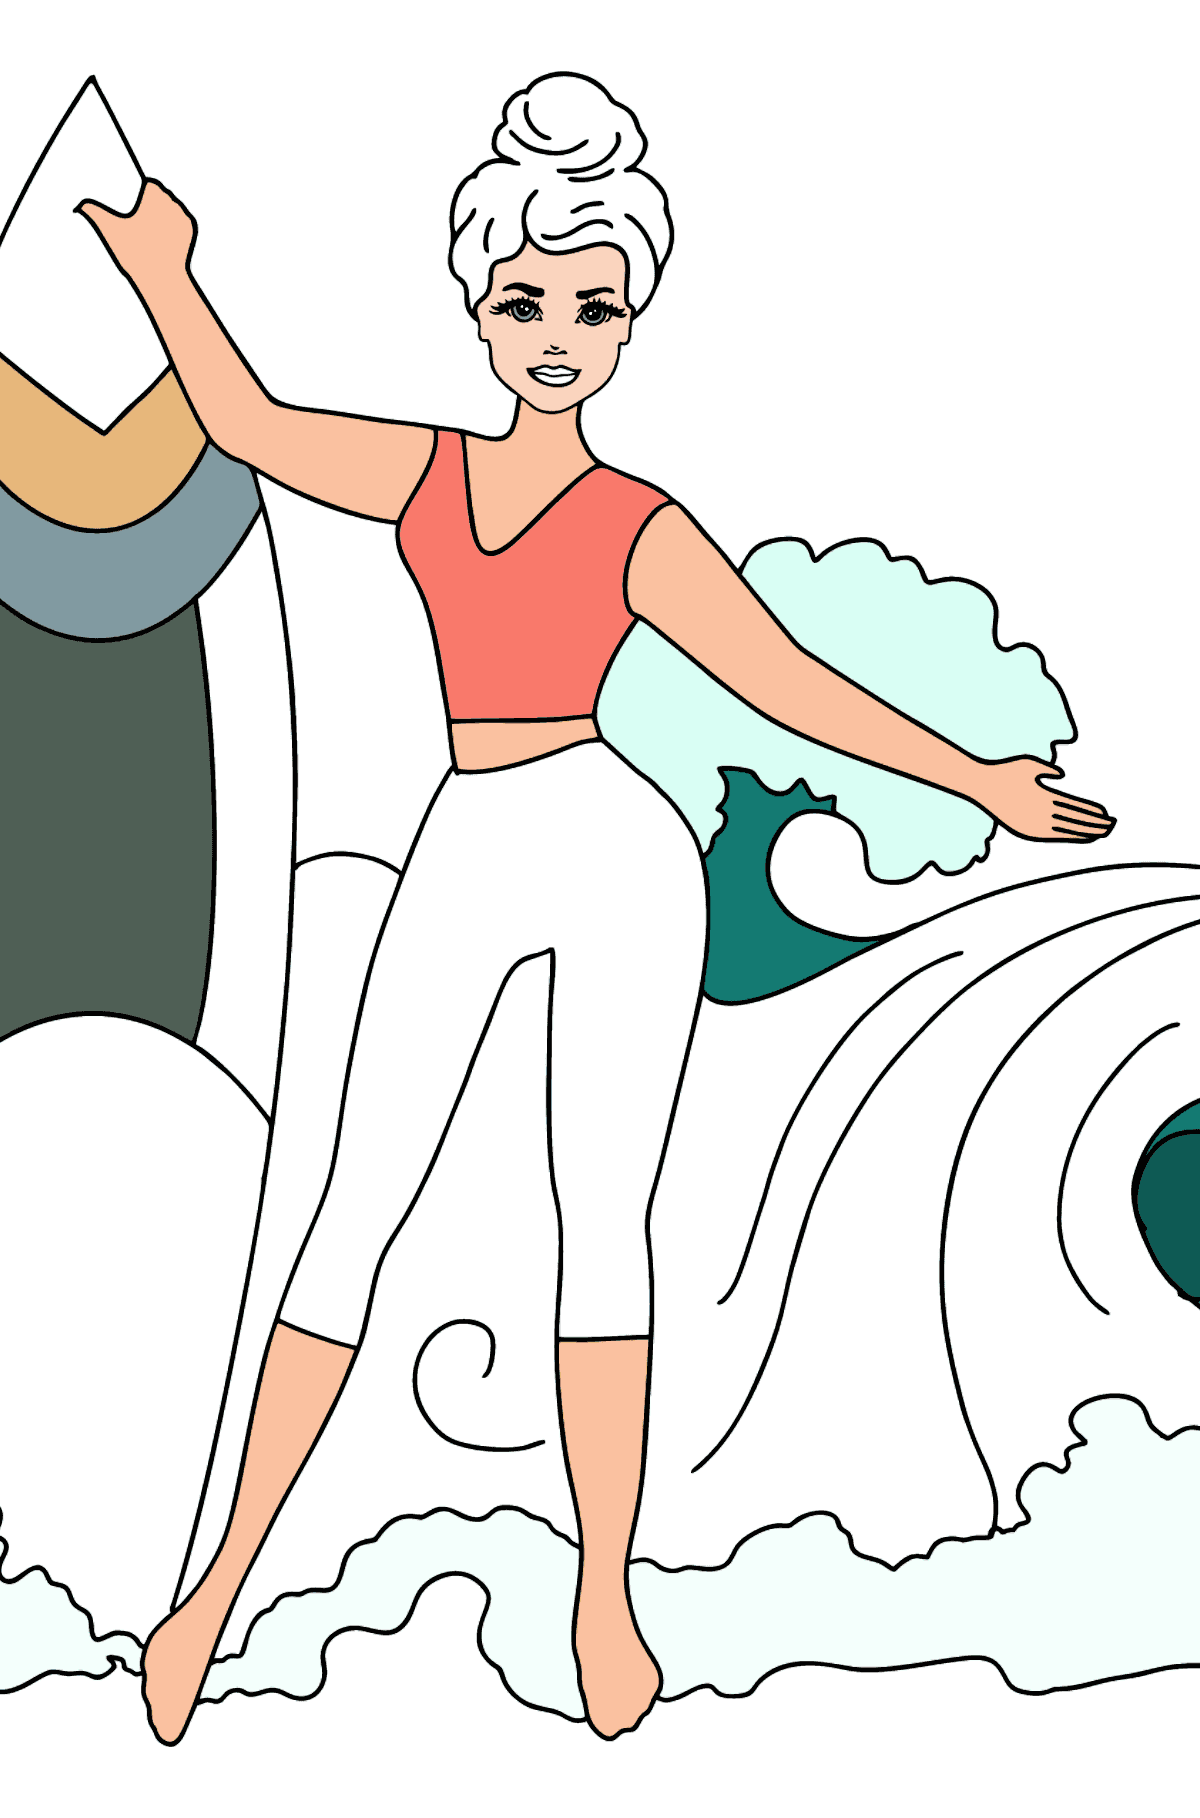 Barbie Surfer Doll coloring page - Coloring Pages for Kids